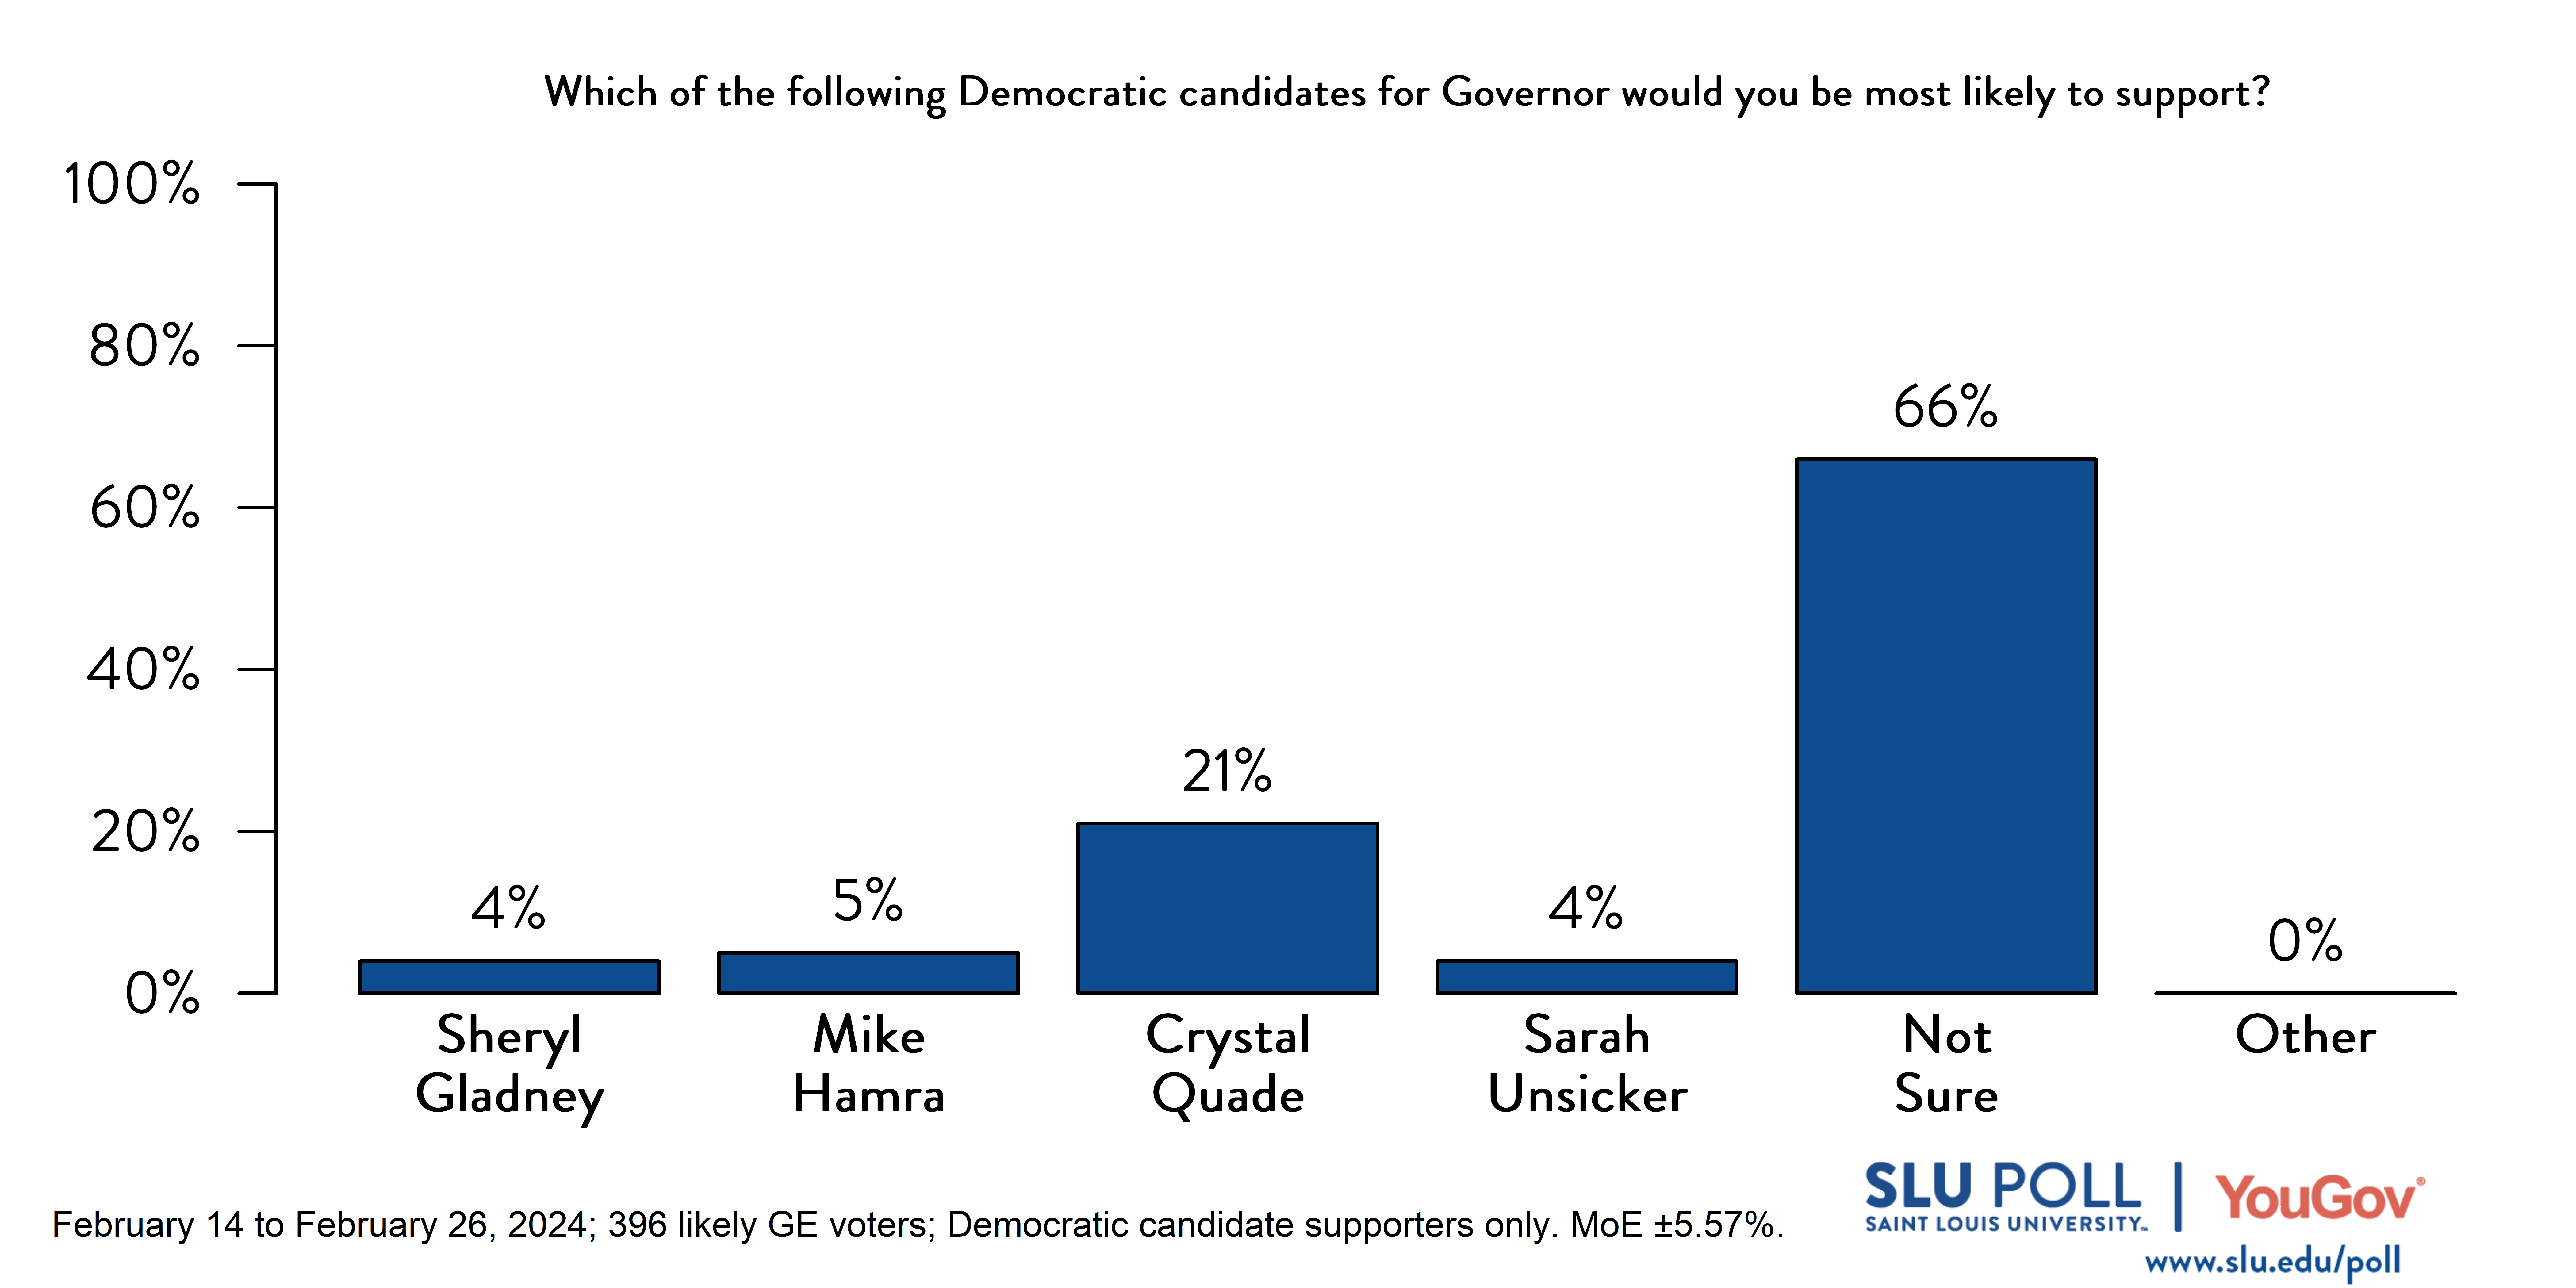 Likely voters' responses to 'Which of the following Democratic candidates for Governor would you be most likely to support?': 4% Sheryl Gladney, 5% Mike Hamra, 21% Crystal Quade, 4% Sarah Unsicker, 66% Not sure, and 0% Other.